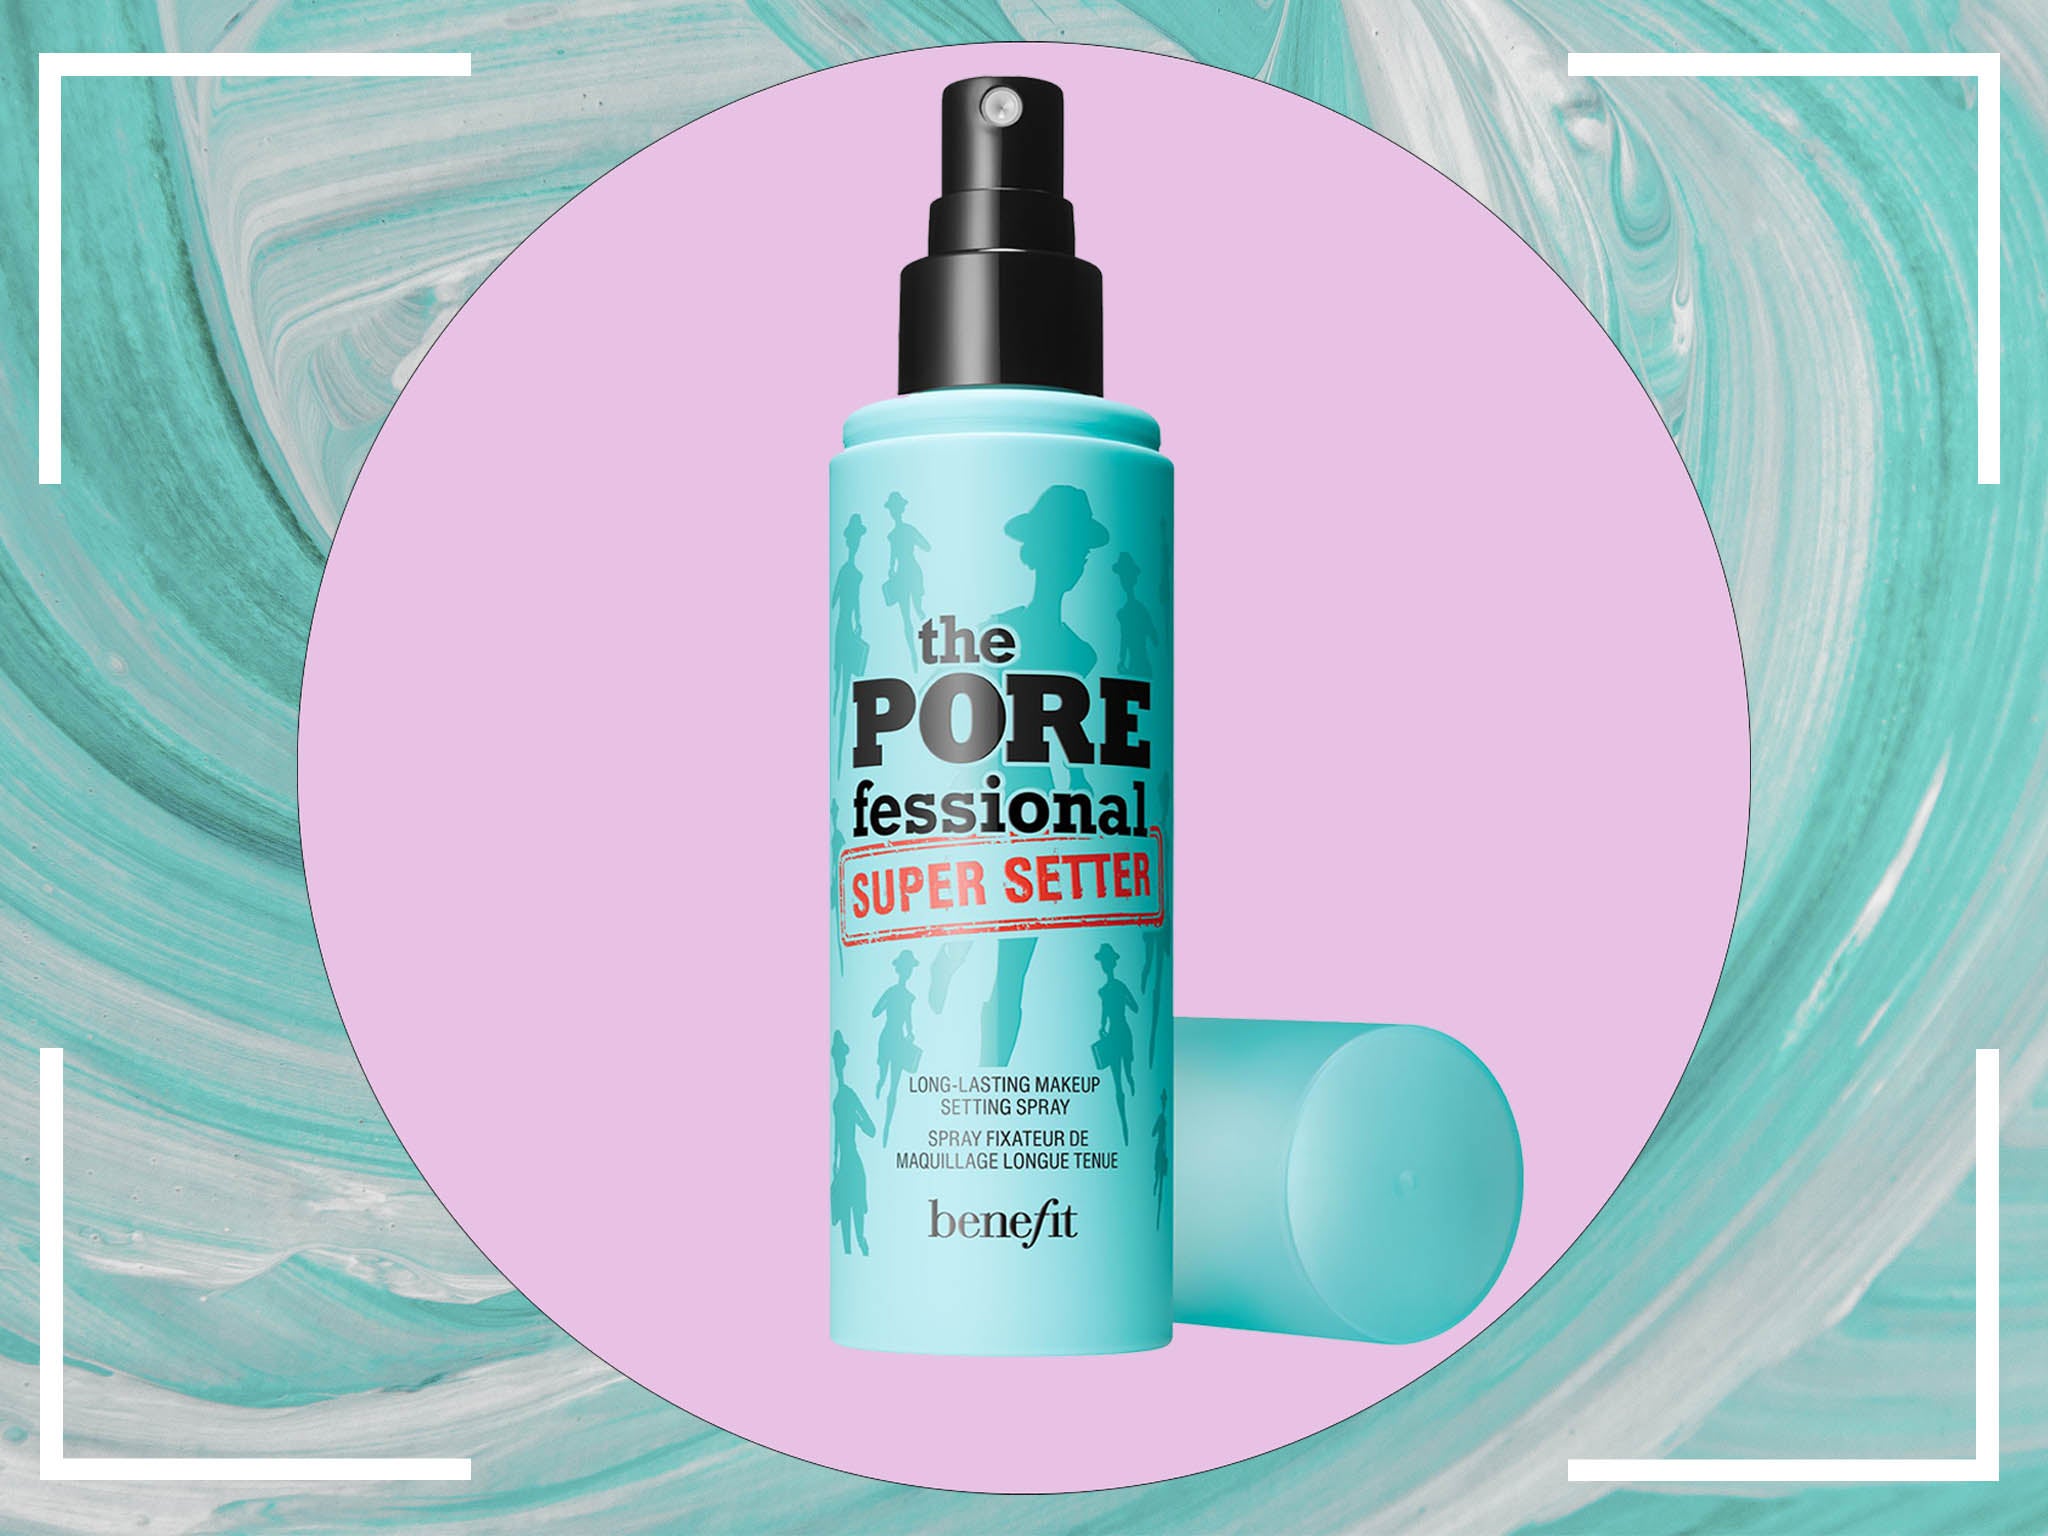 Benefit Cosmetics has just launched a new pore care range and an